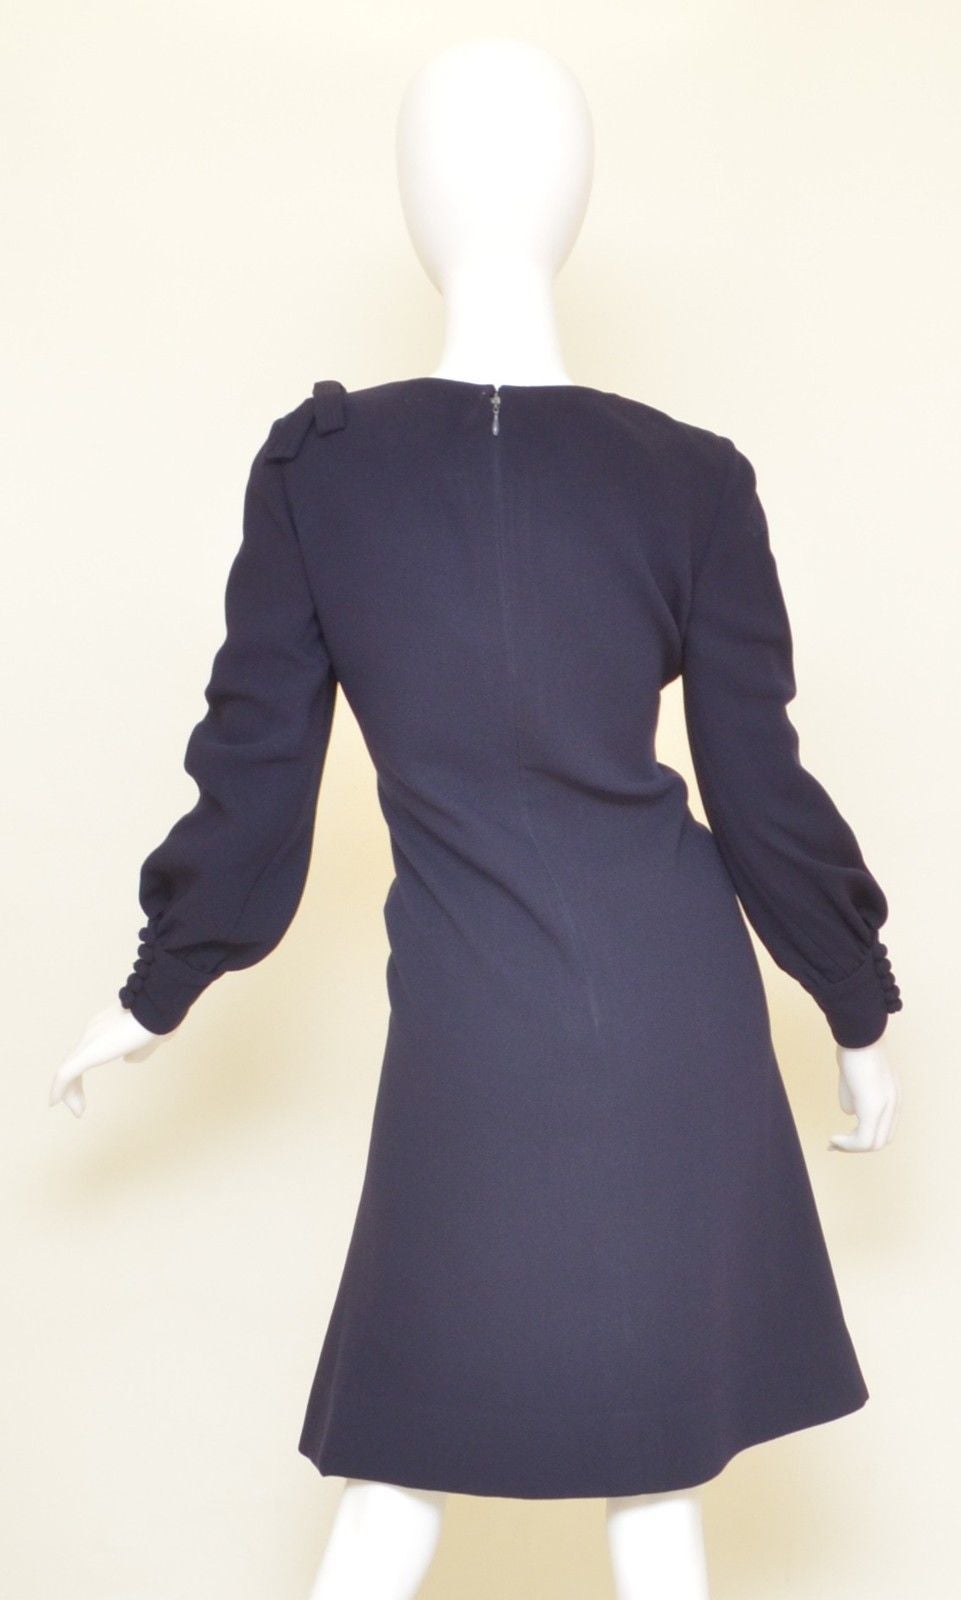 Vintage 1970's wool dress has a back zipper closure, button closures at the cuffs, decorative bow at the shoulder, A-line silhouette, and ruching at the sleeves. Dress has some normal wears to the buttons and some pulling to the wool material from